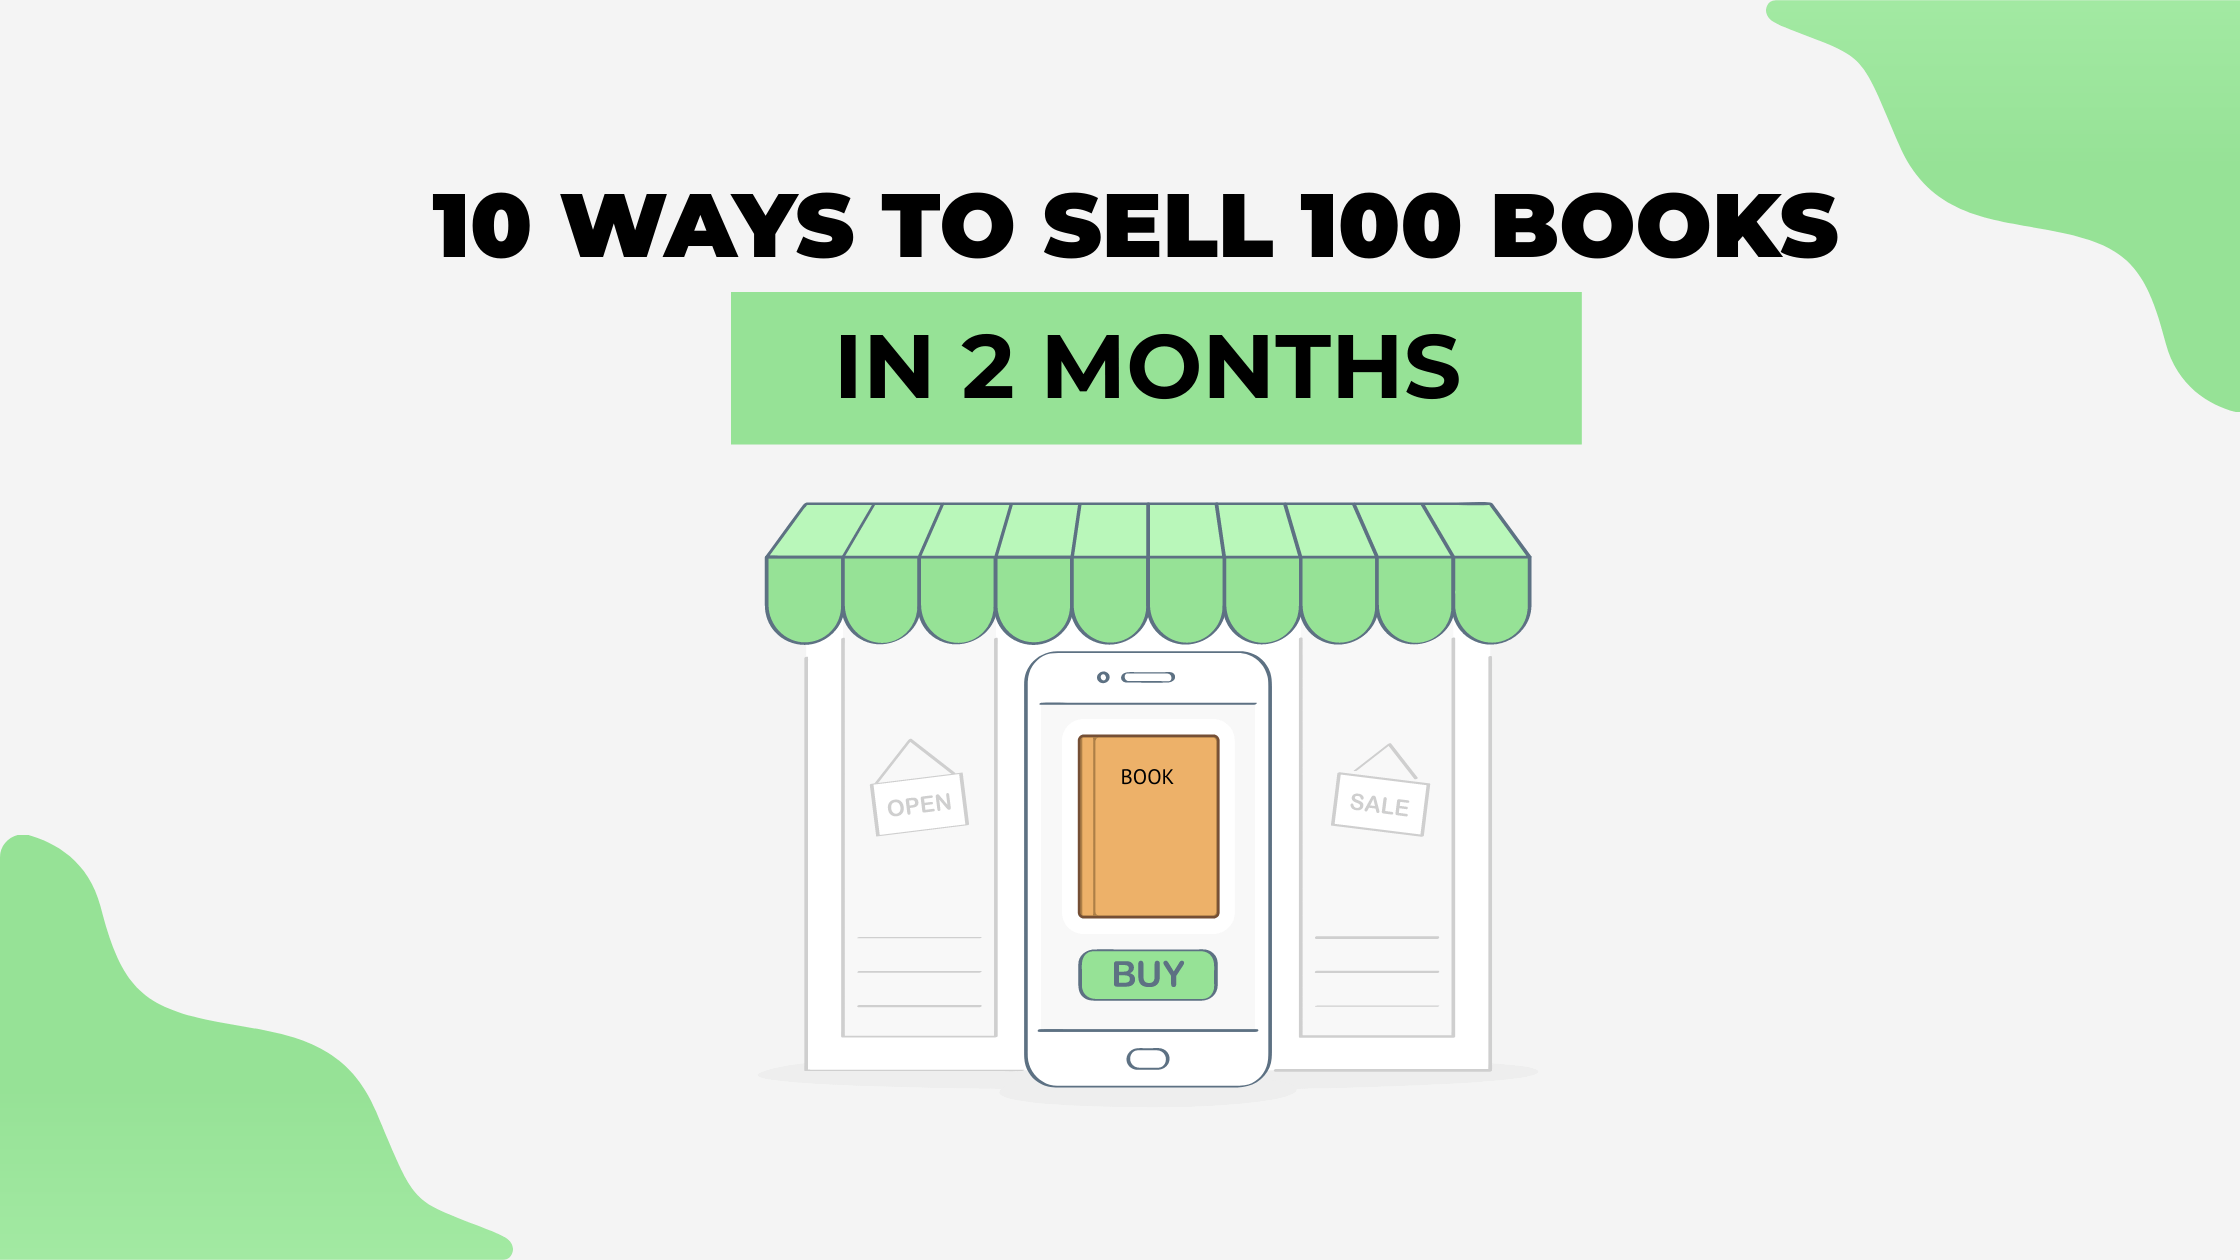 10 Ways to Sell 100 Books in 2 Months